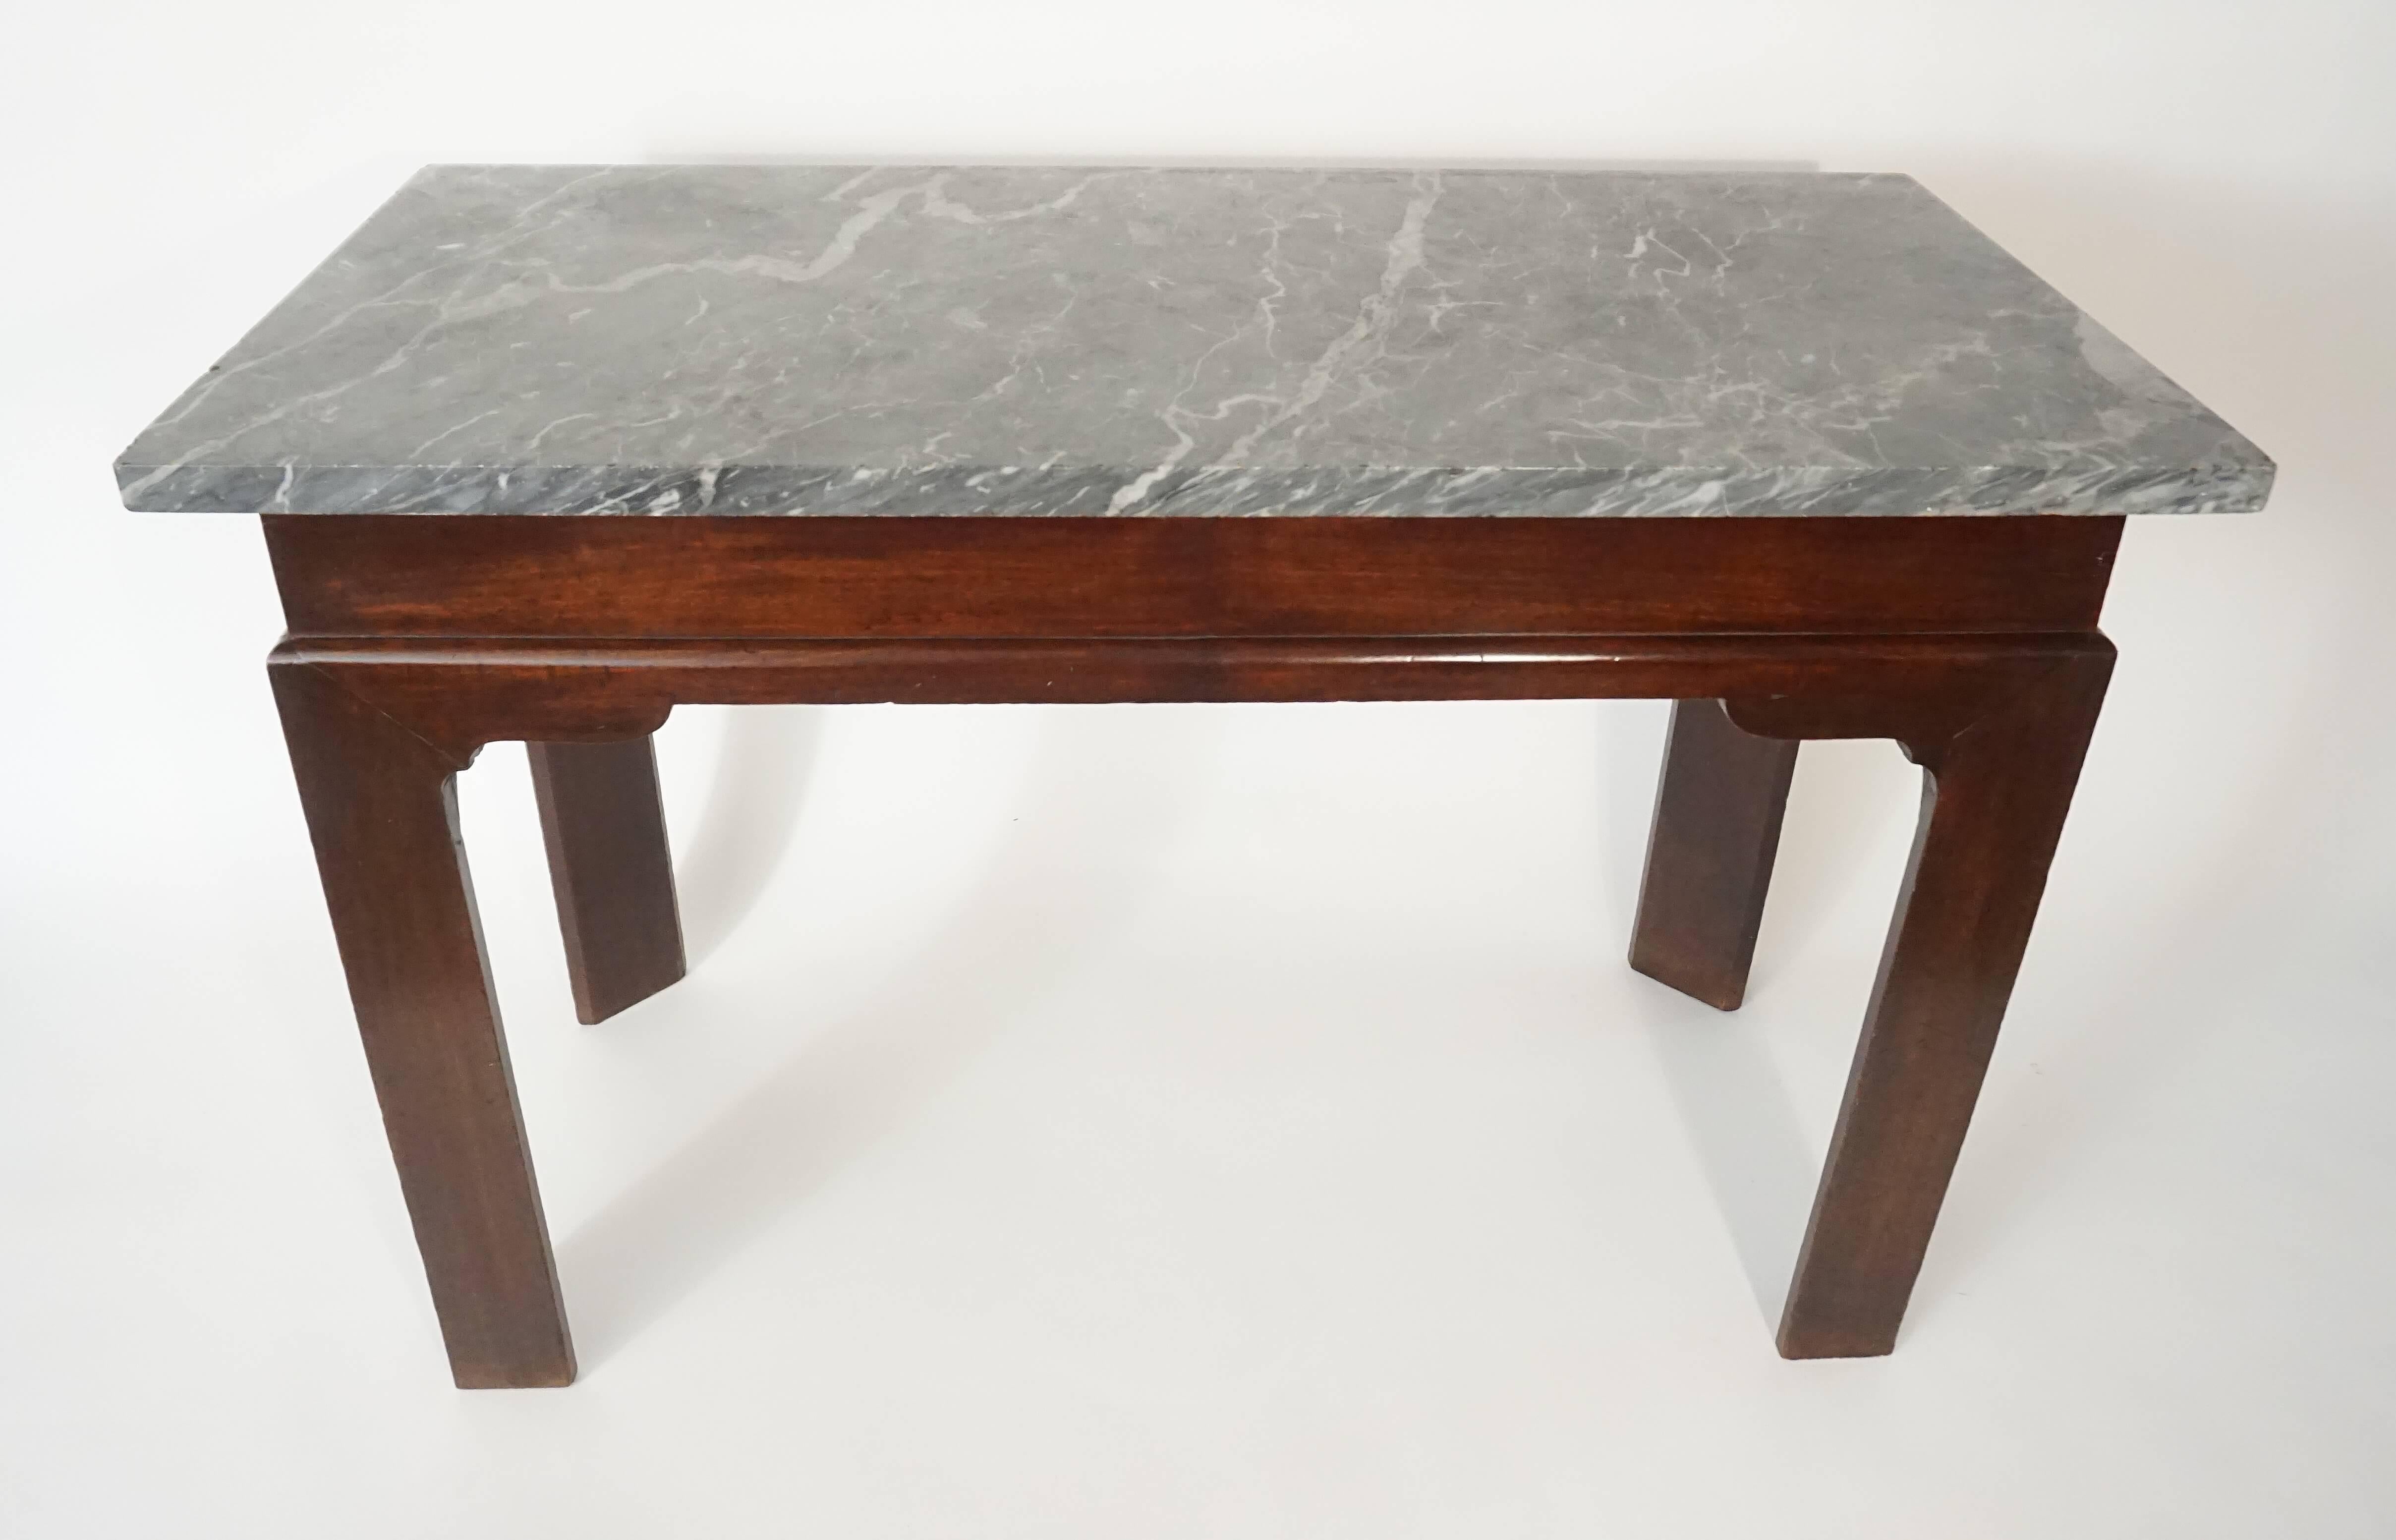 English Georgian Marble Top Mahogany Slab or Side Table, circa 1760 In Good Condition For Sale In Kinderhook, NY